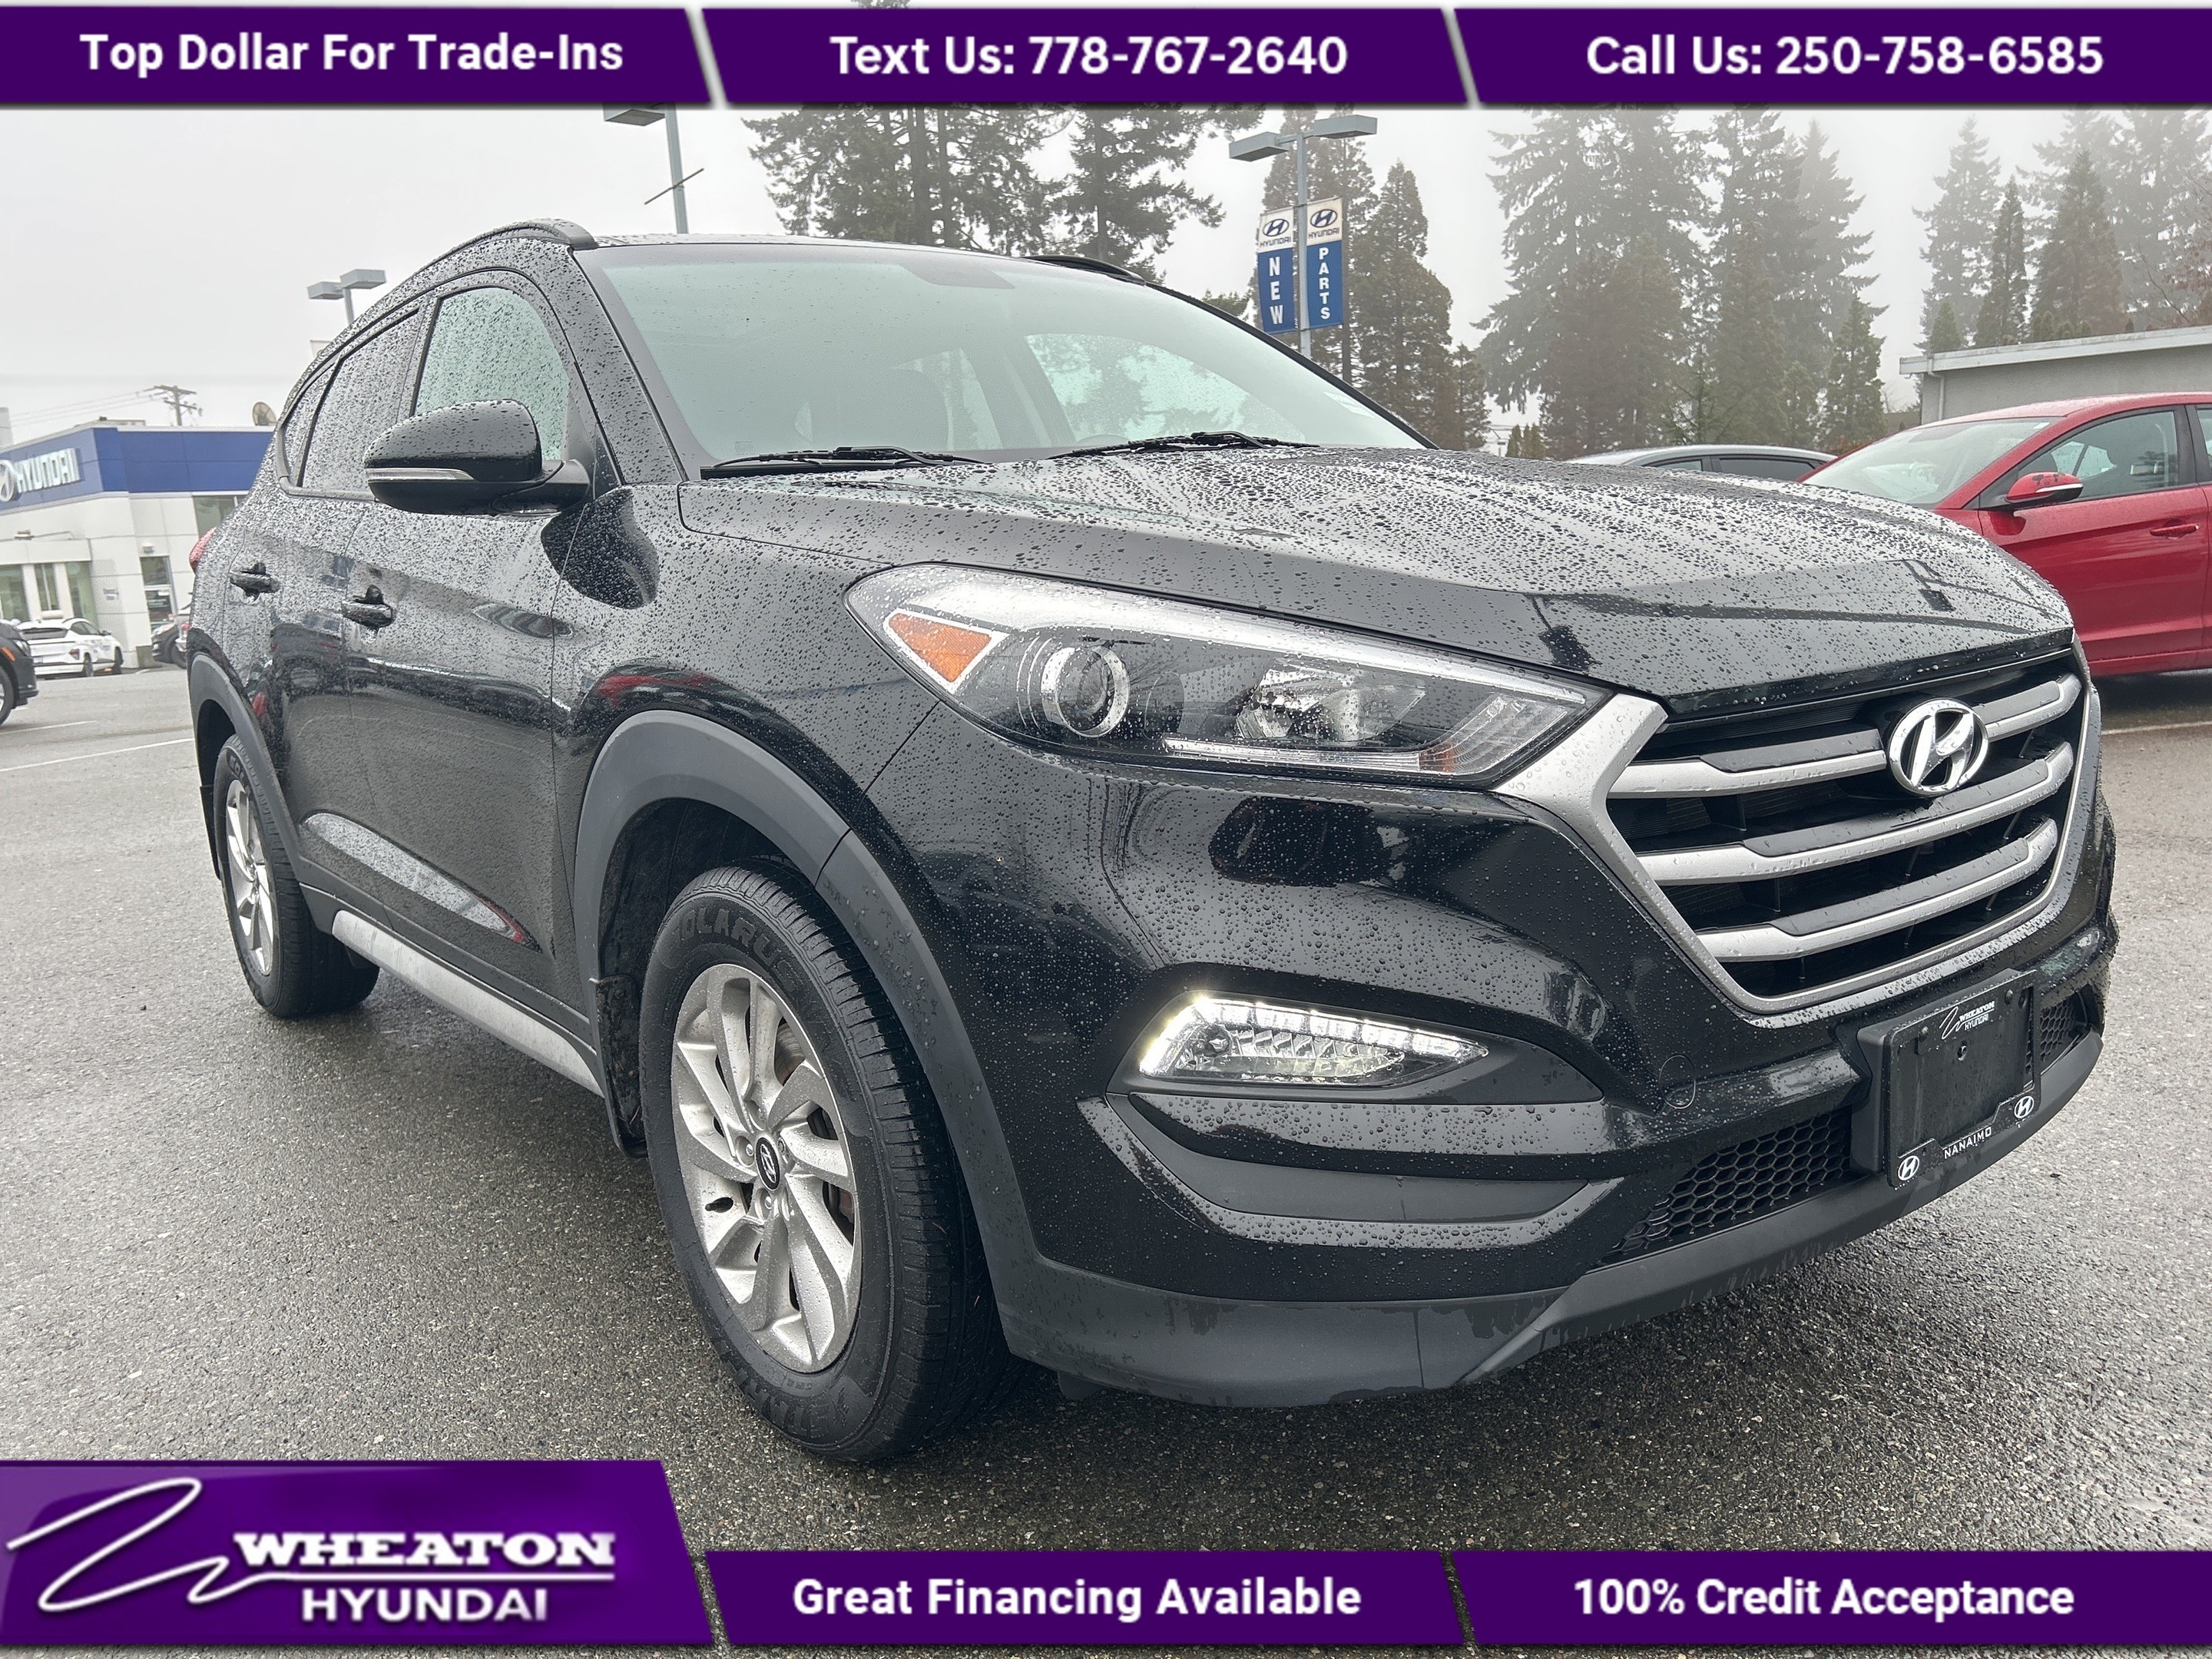 2017 Hyundai Tucson SE, One Owner, Local, Trade in, Leather, Heated Se